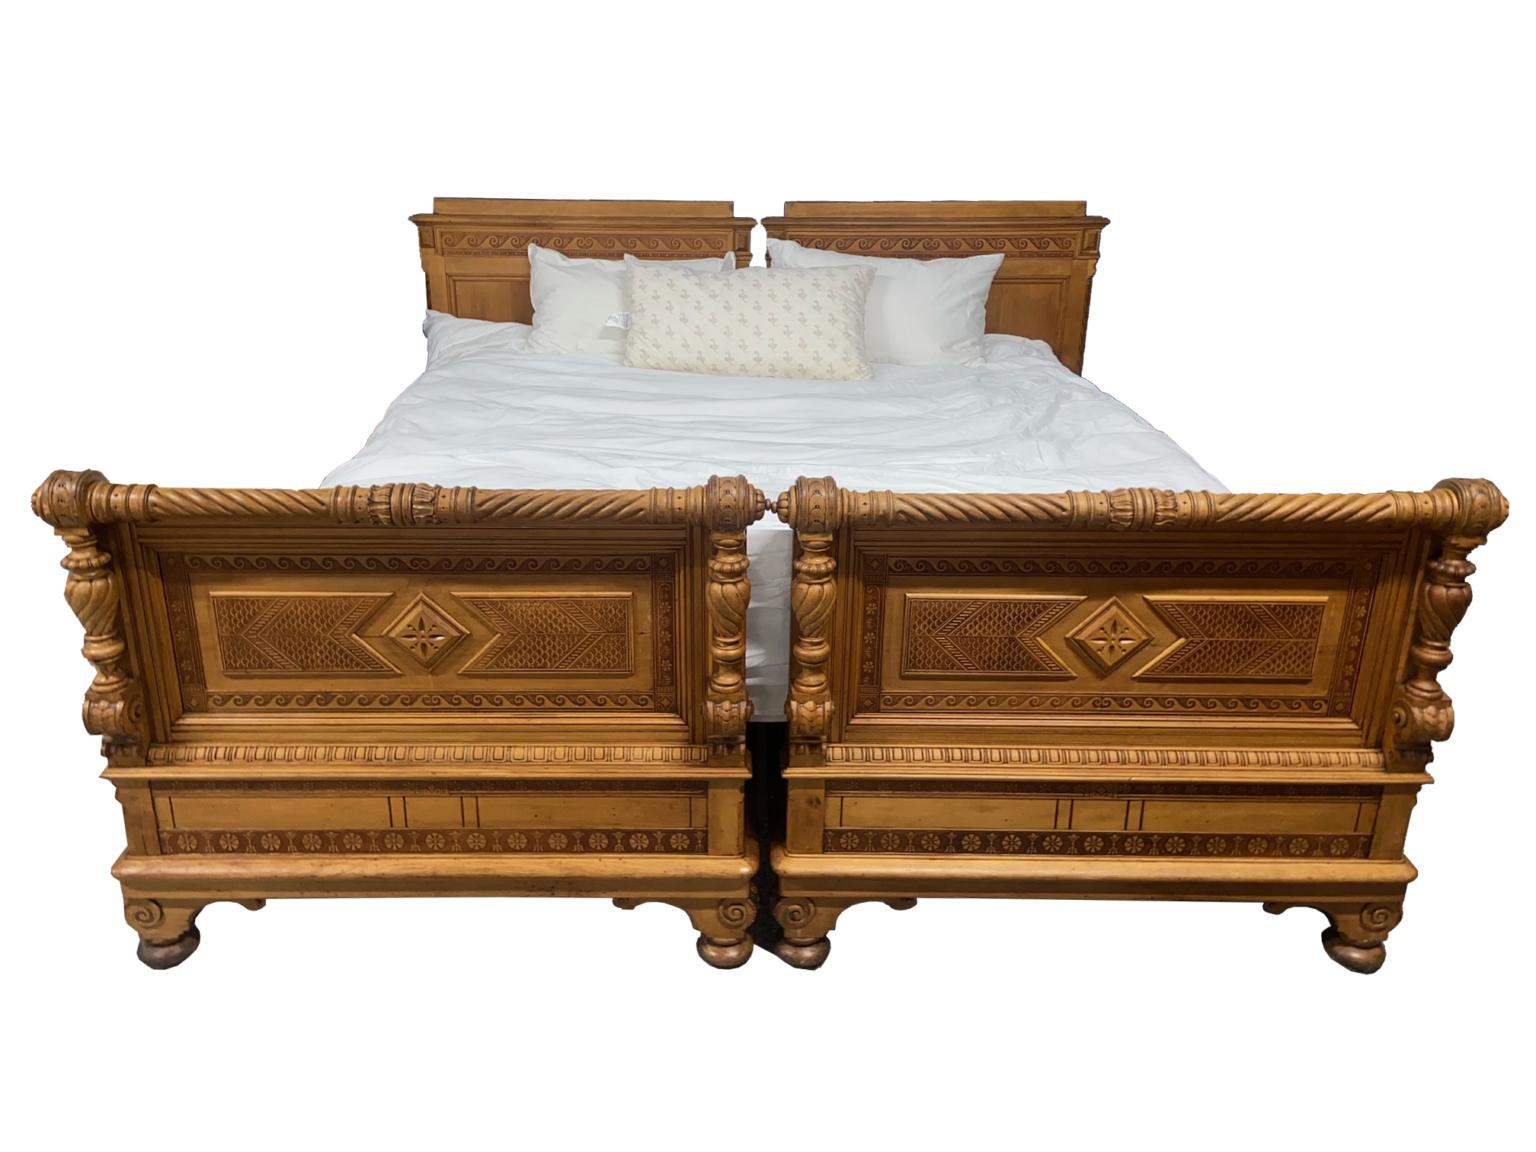 antique pine twin bed